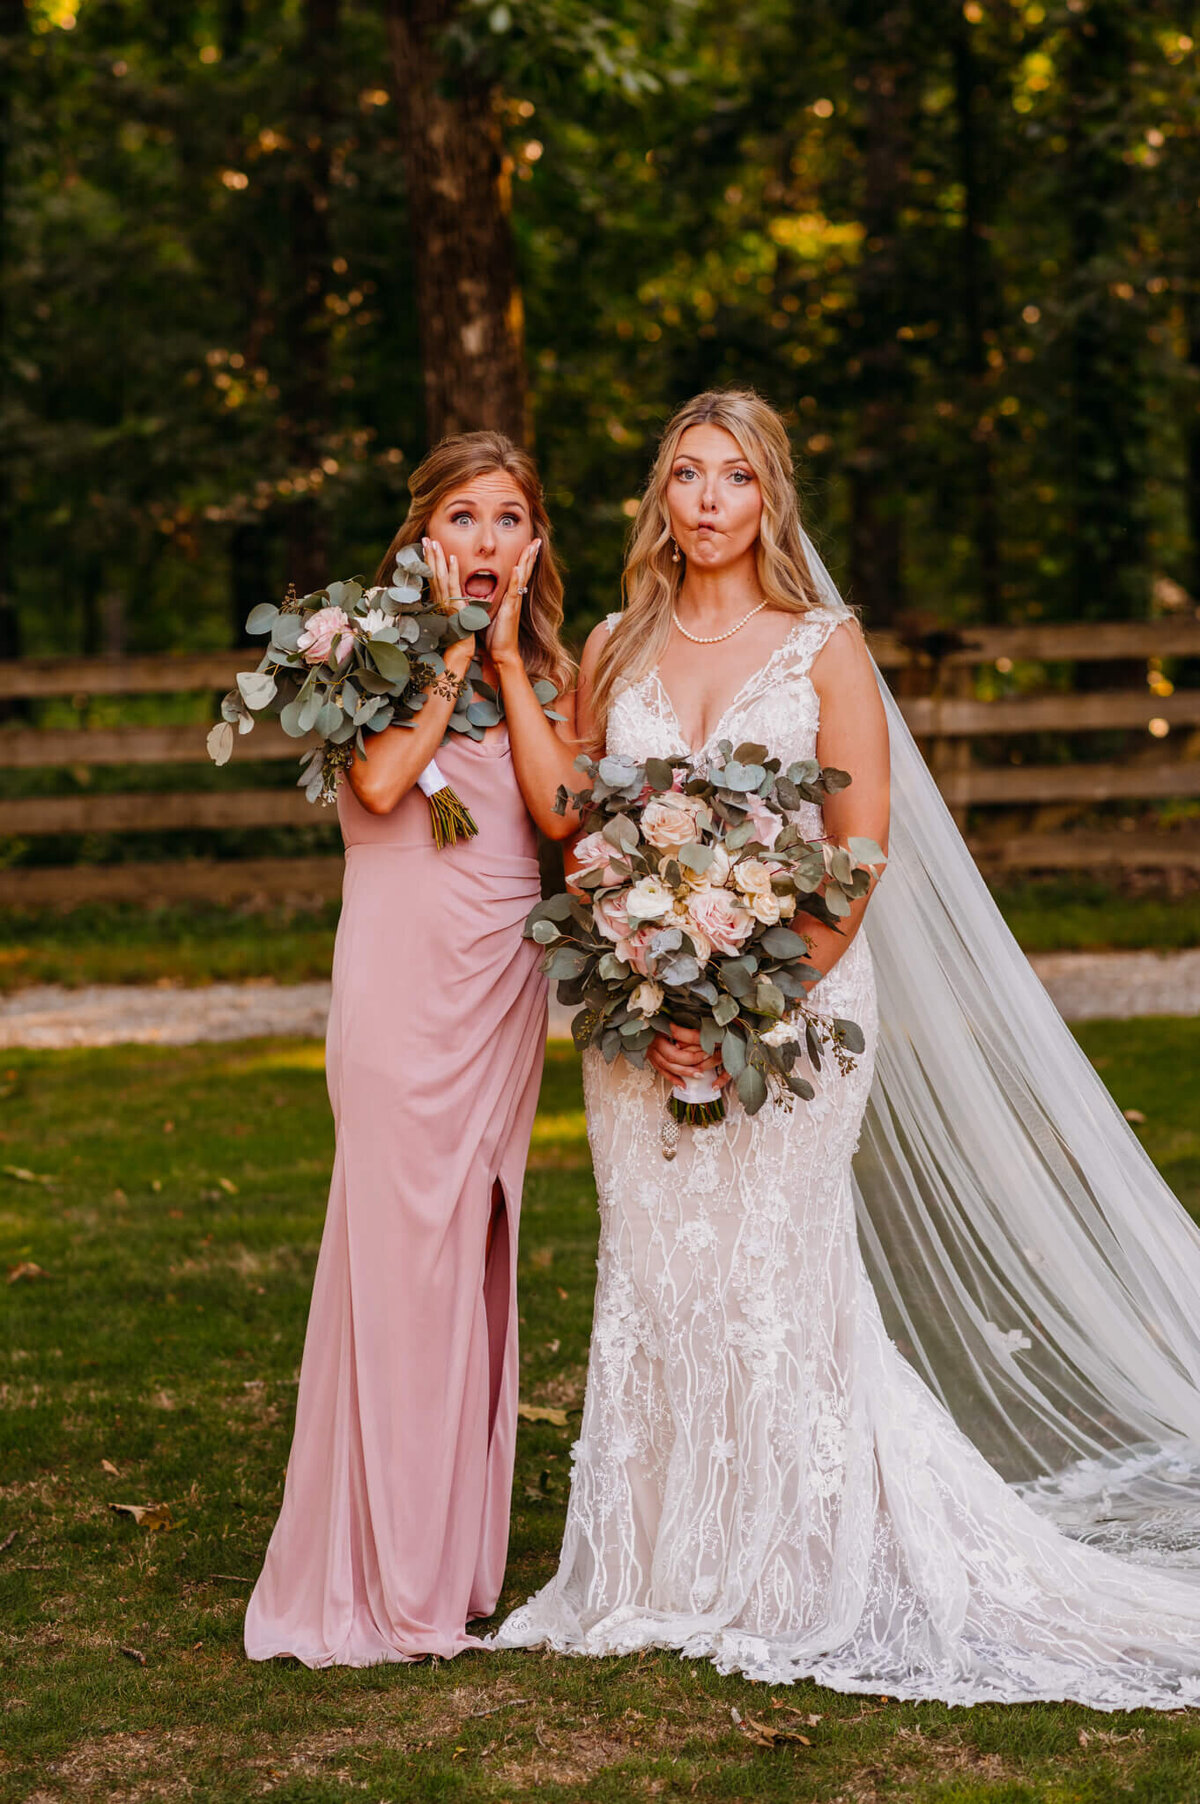 Photo of a woman in a pink dress and a bride making silly faces and holding bouquets